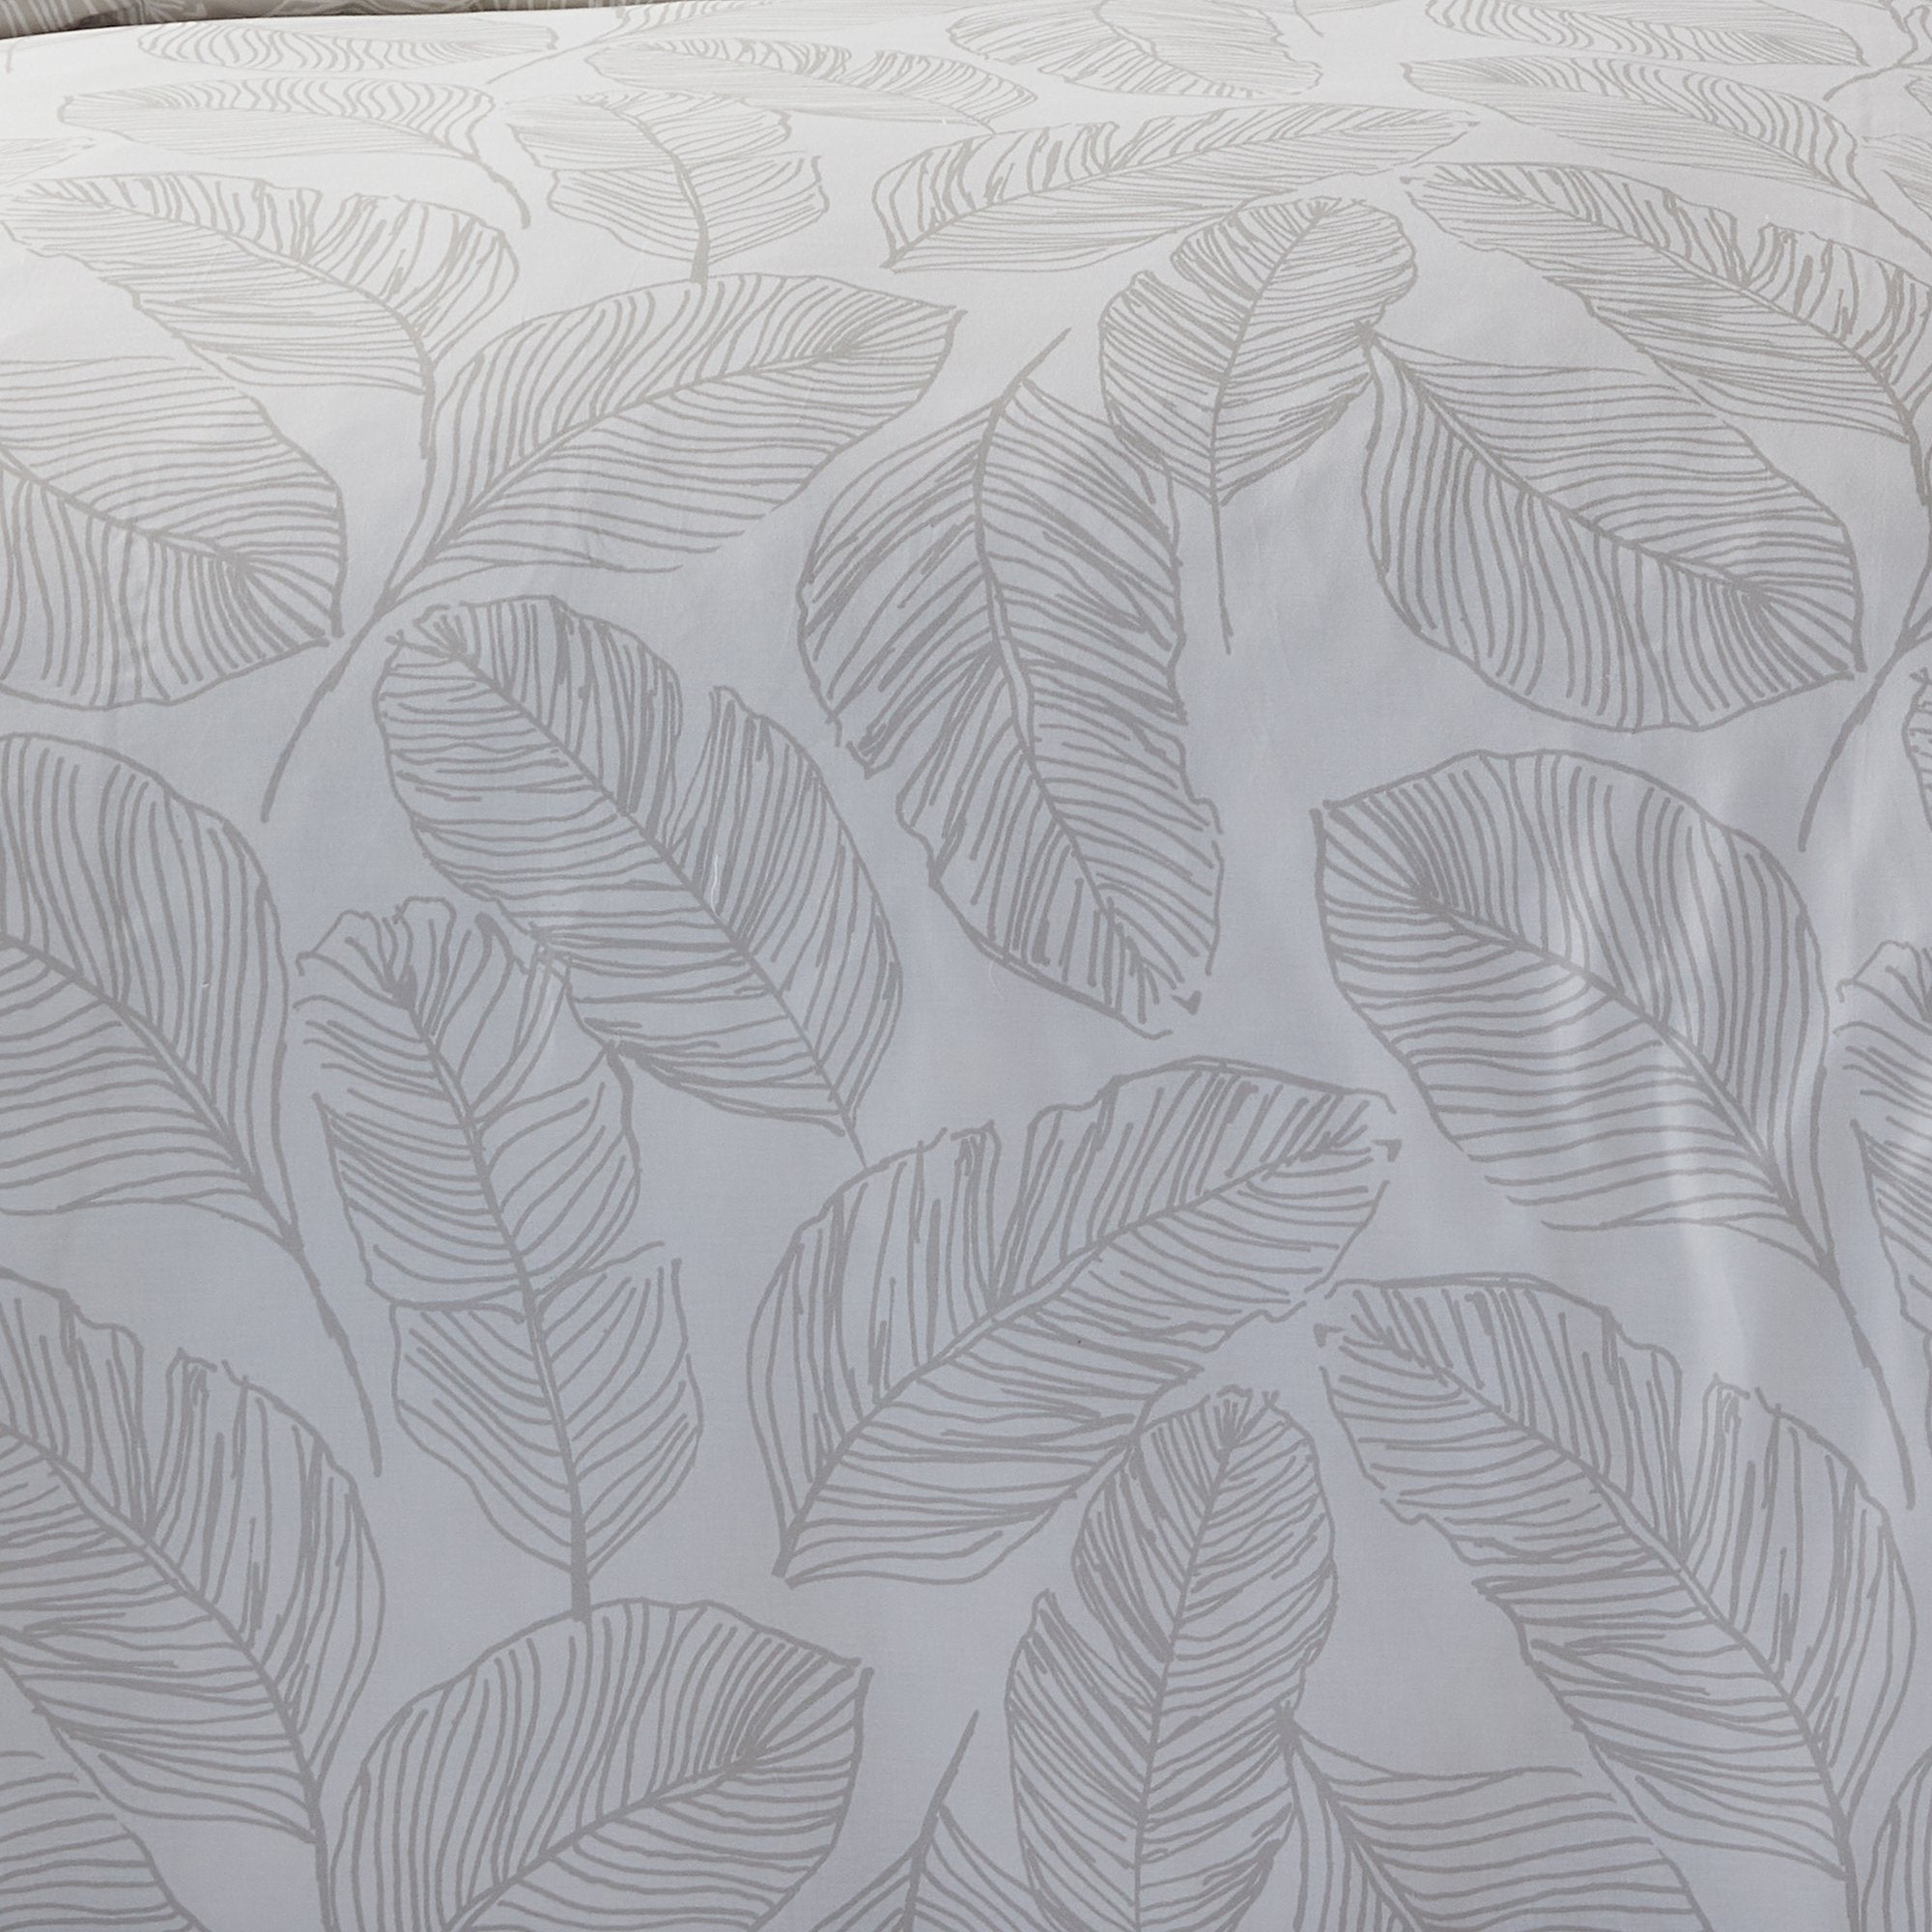 Duvet Cover Set Matteo by Fusion in Natural